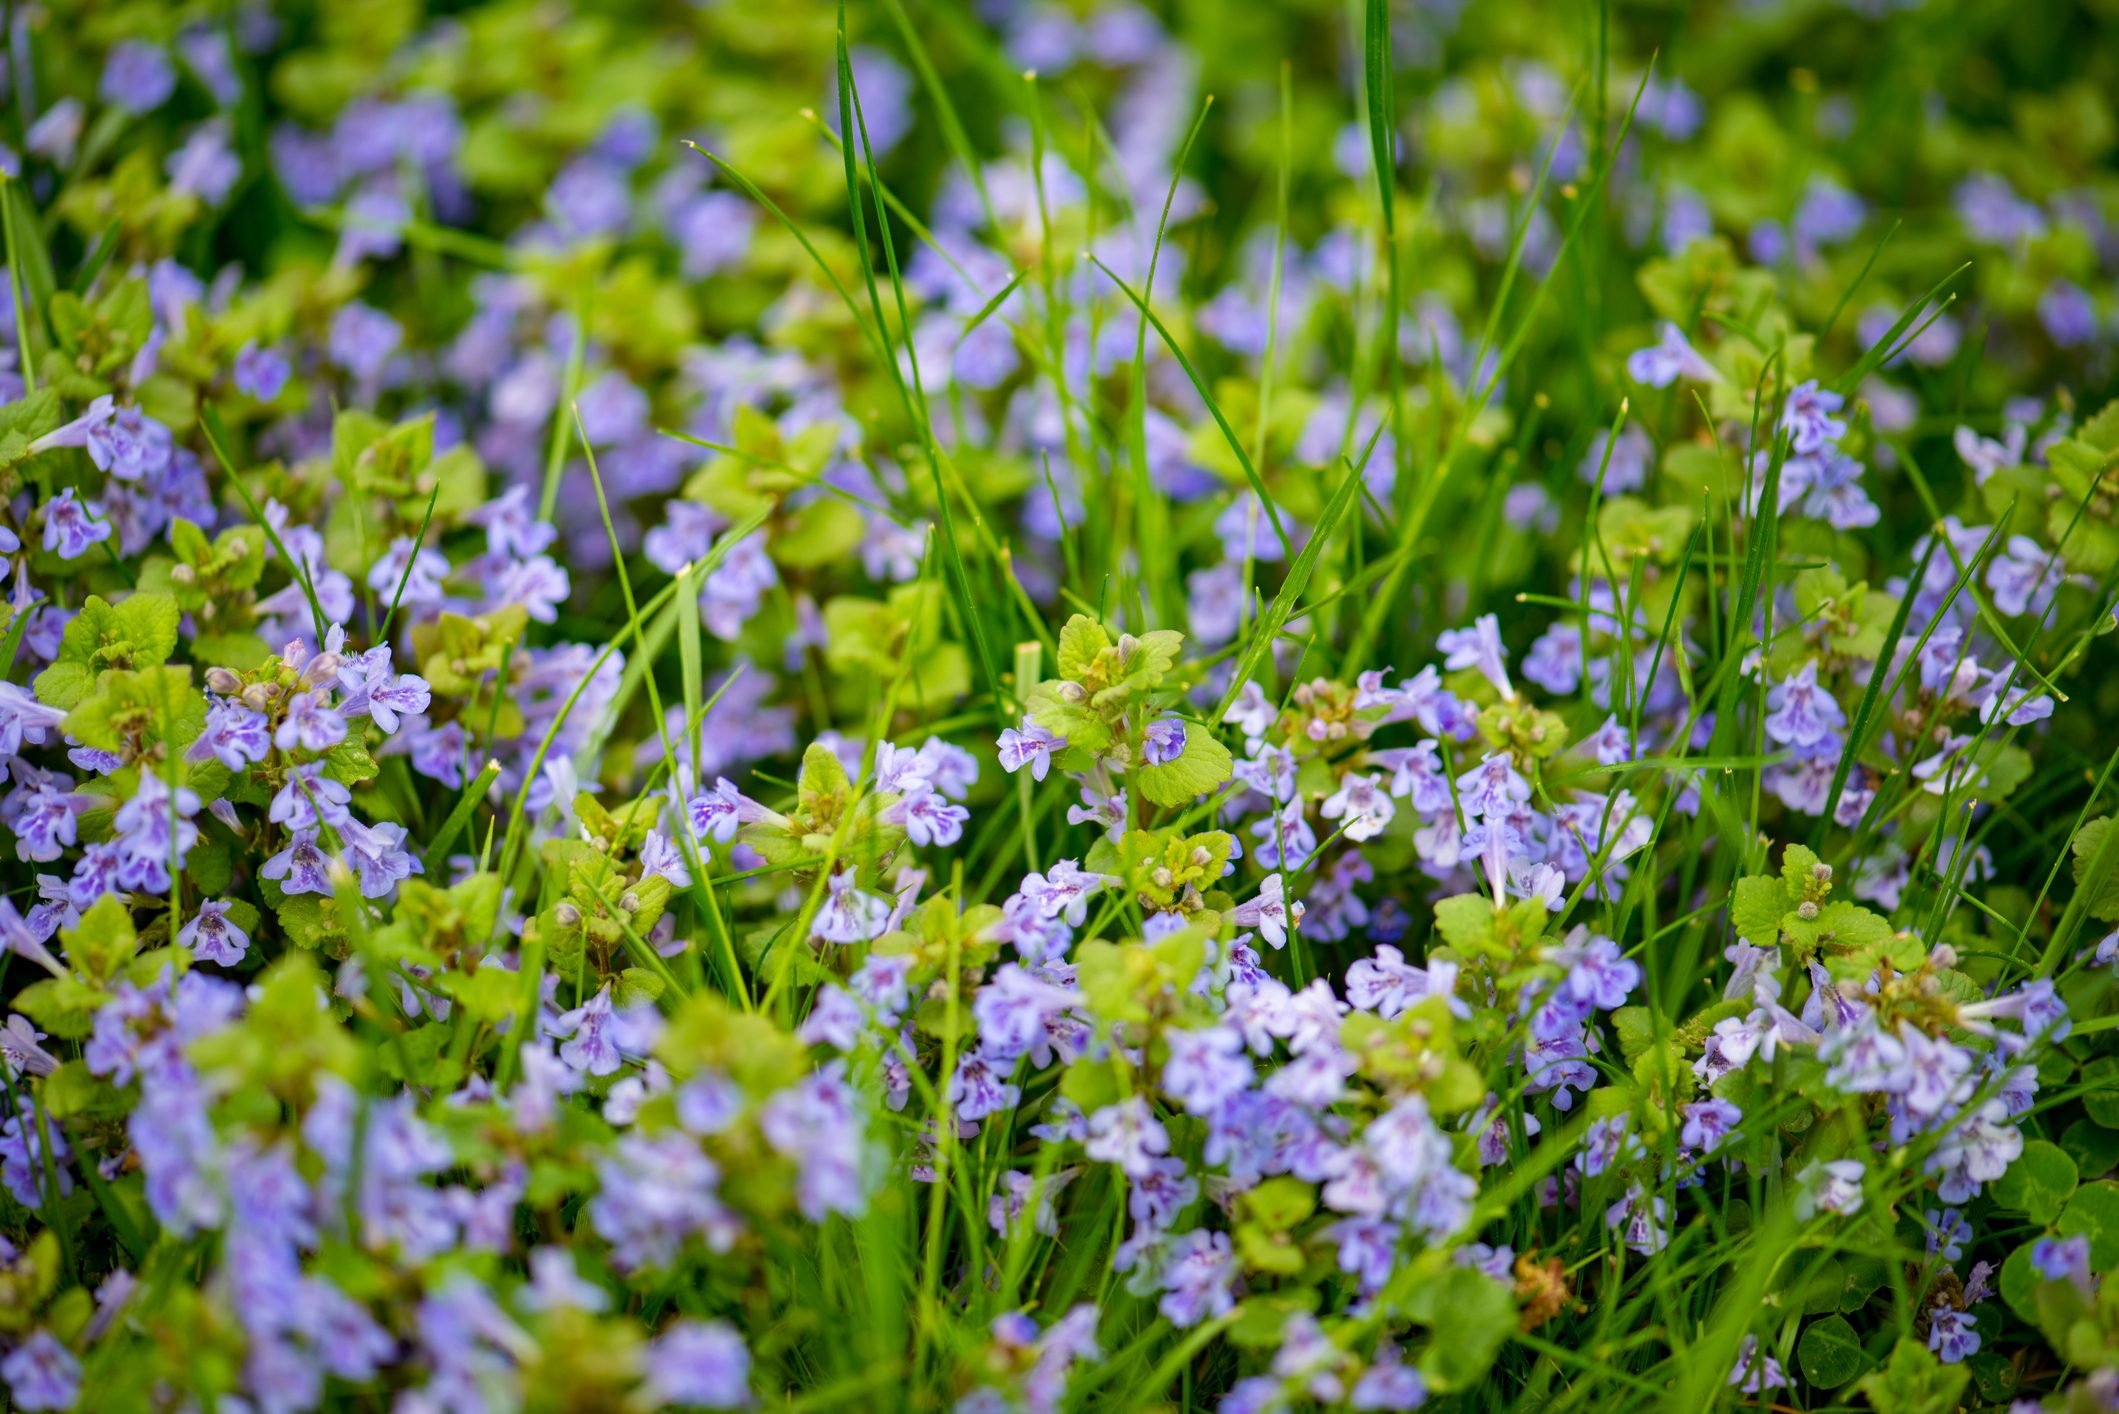 Purple creeping Charlie weed overtaking the green grass of the front lawn.